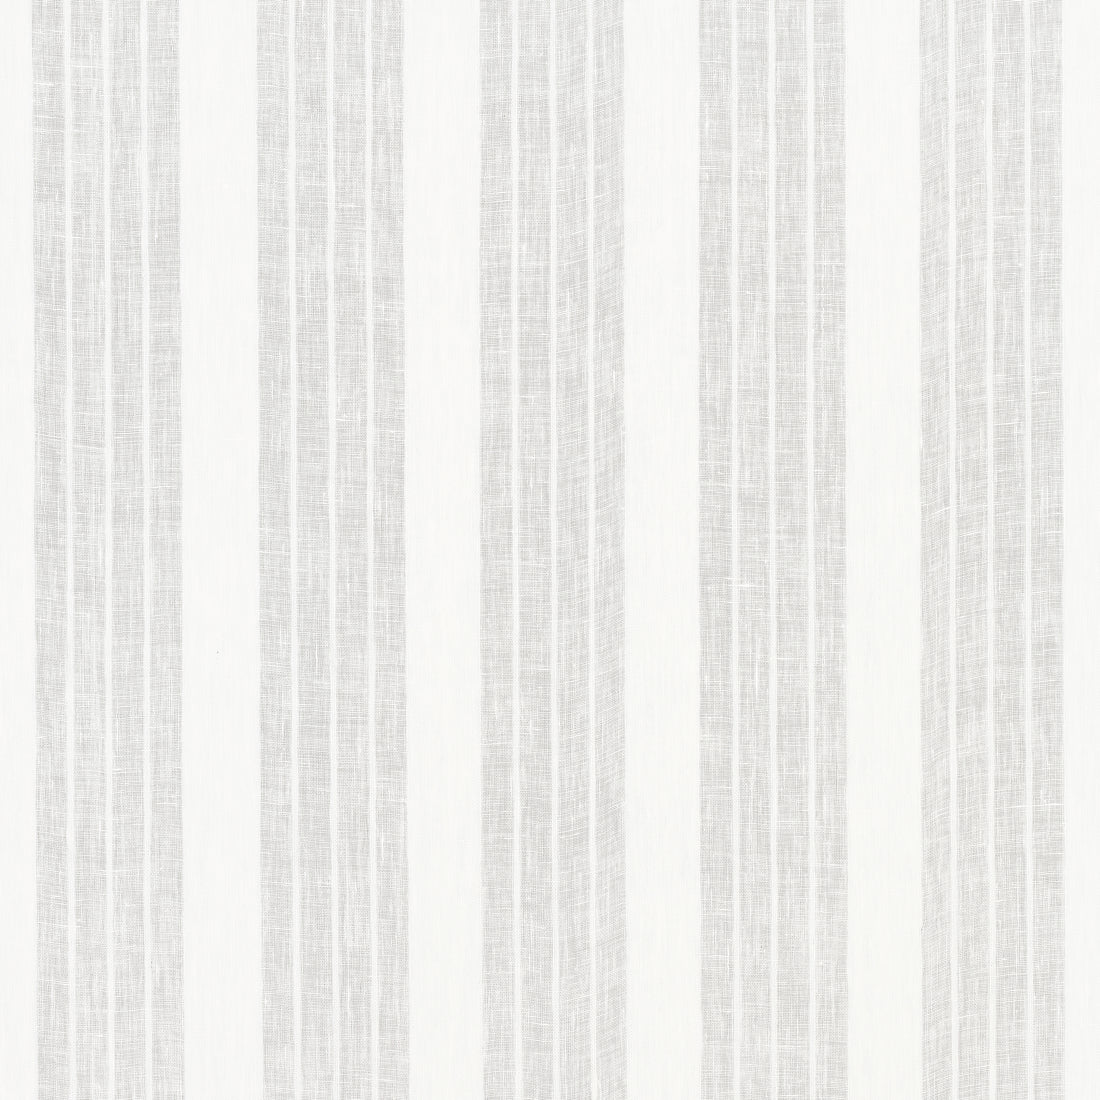 Crystal Stripe fabric in ivory color - pattern number W72916 - by Thibaut in the Paramount collection